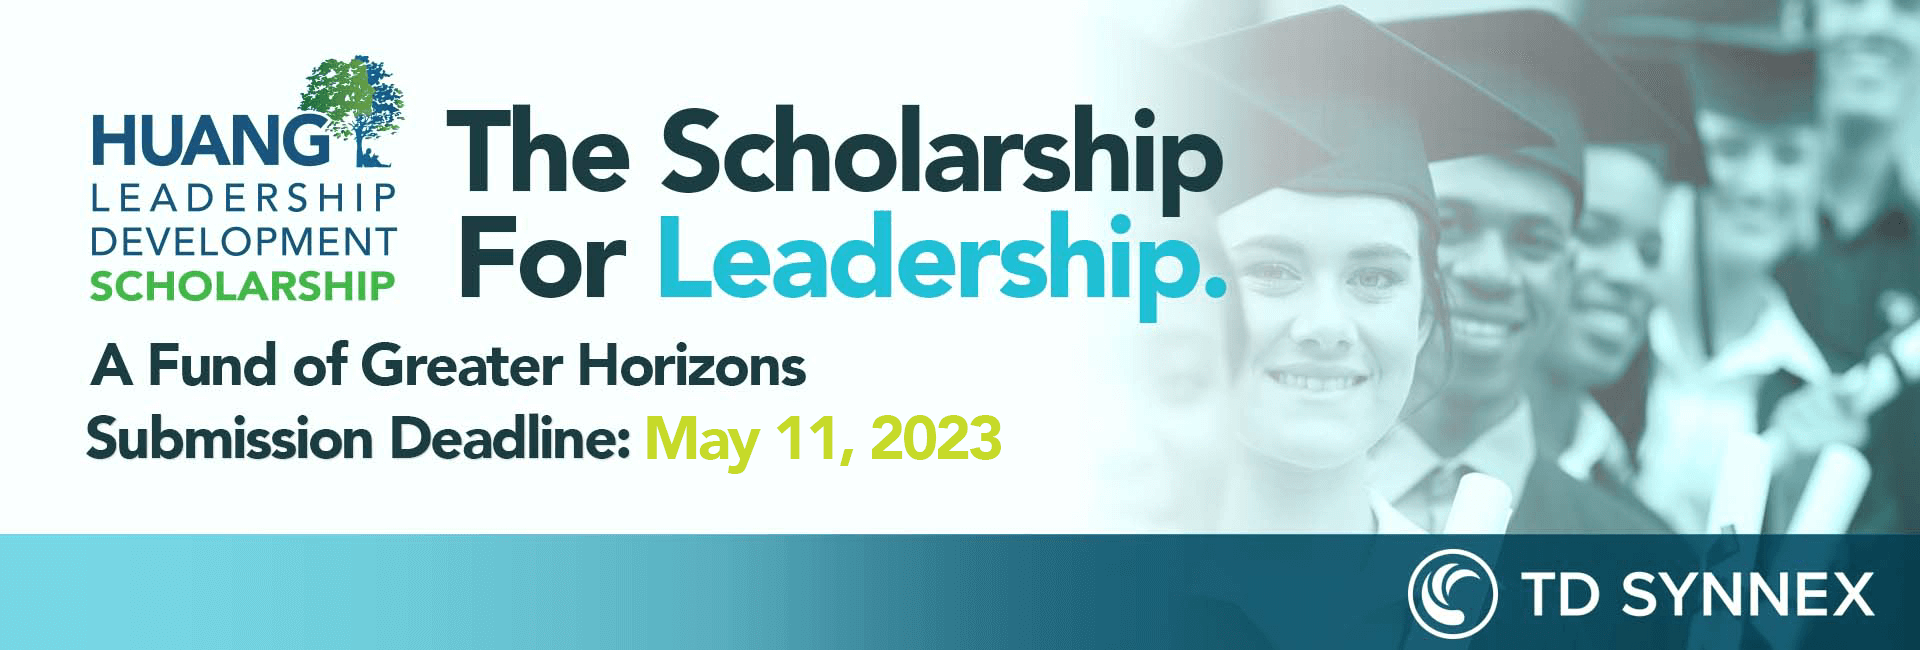 Scholarship a fund of greater horizons